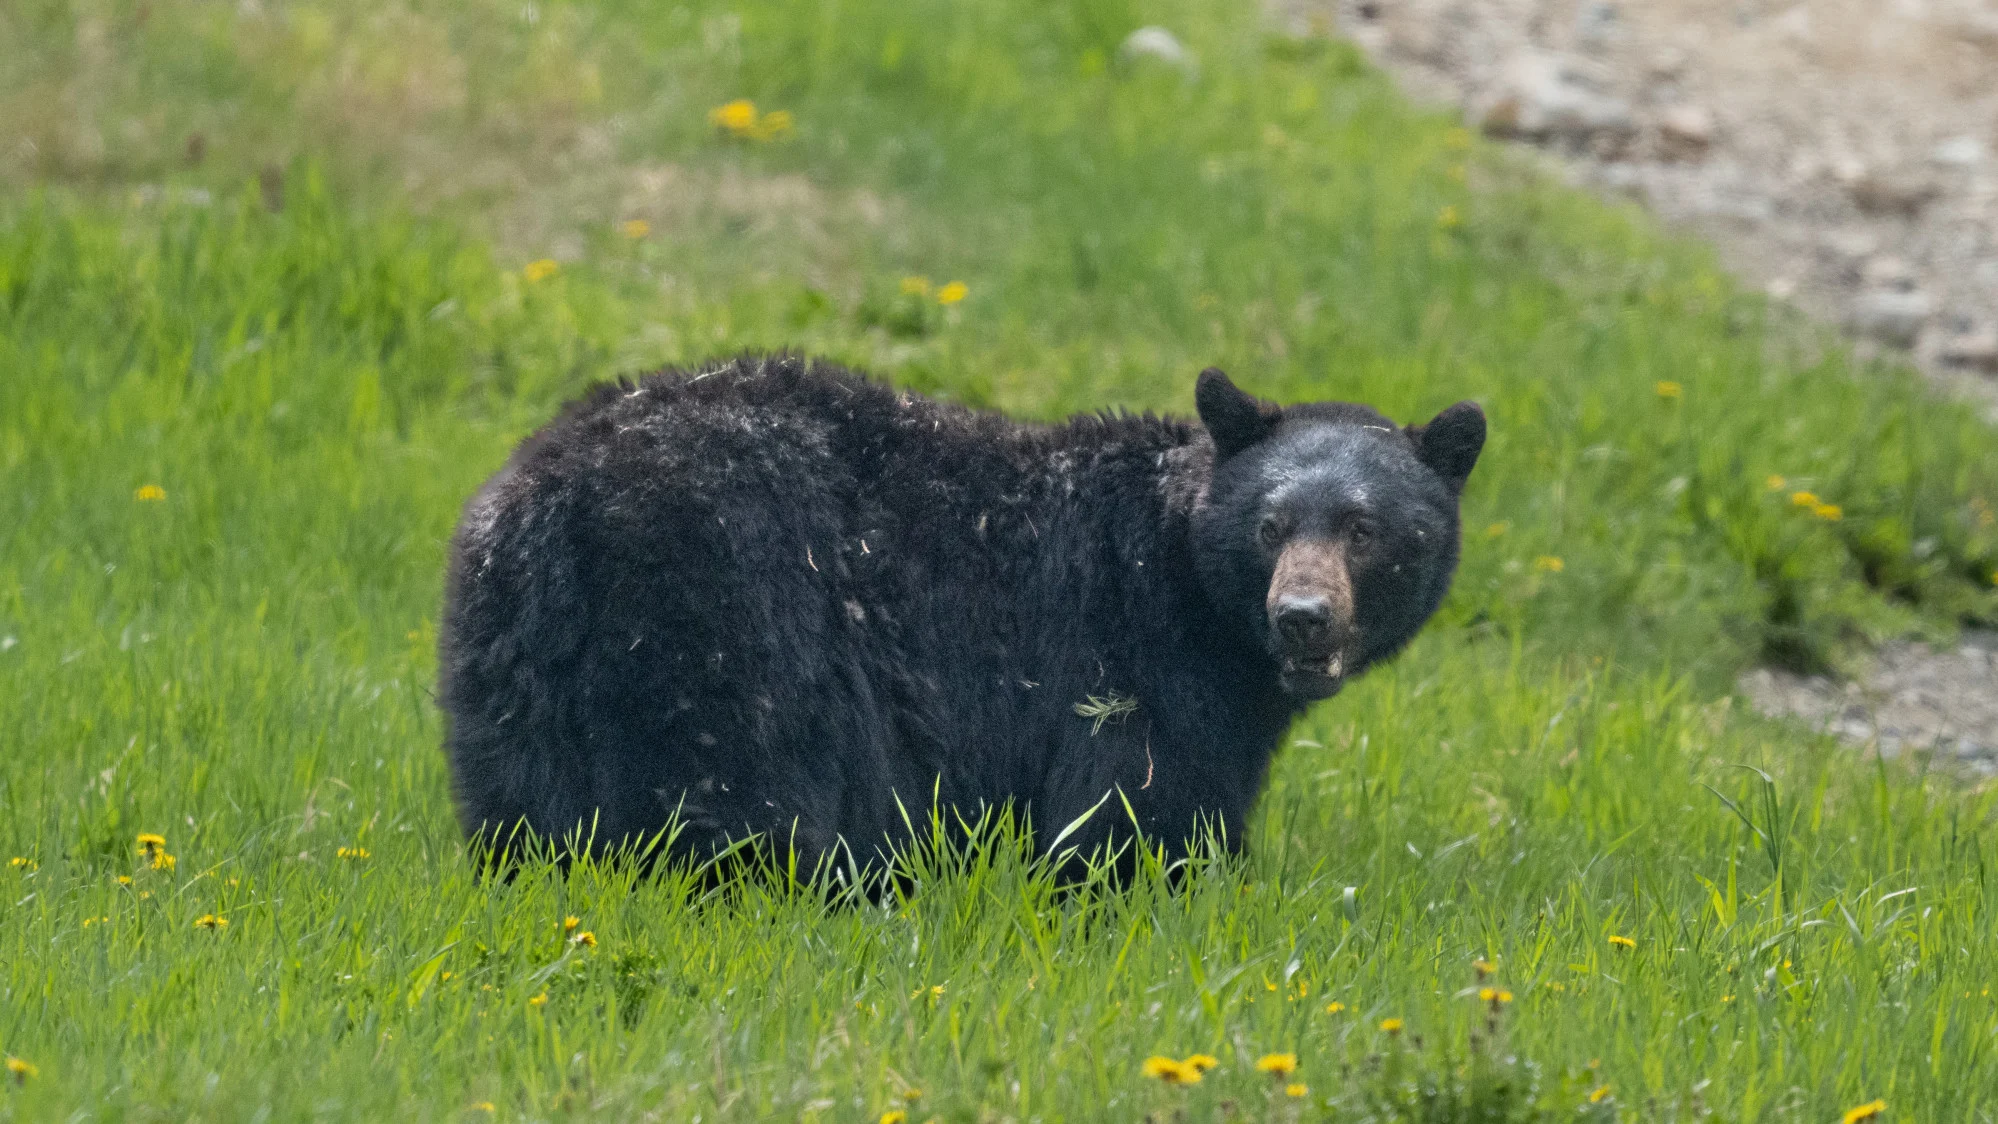 Ontarians urged to be cautious as warm weather may see bears leave dens early 